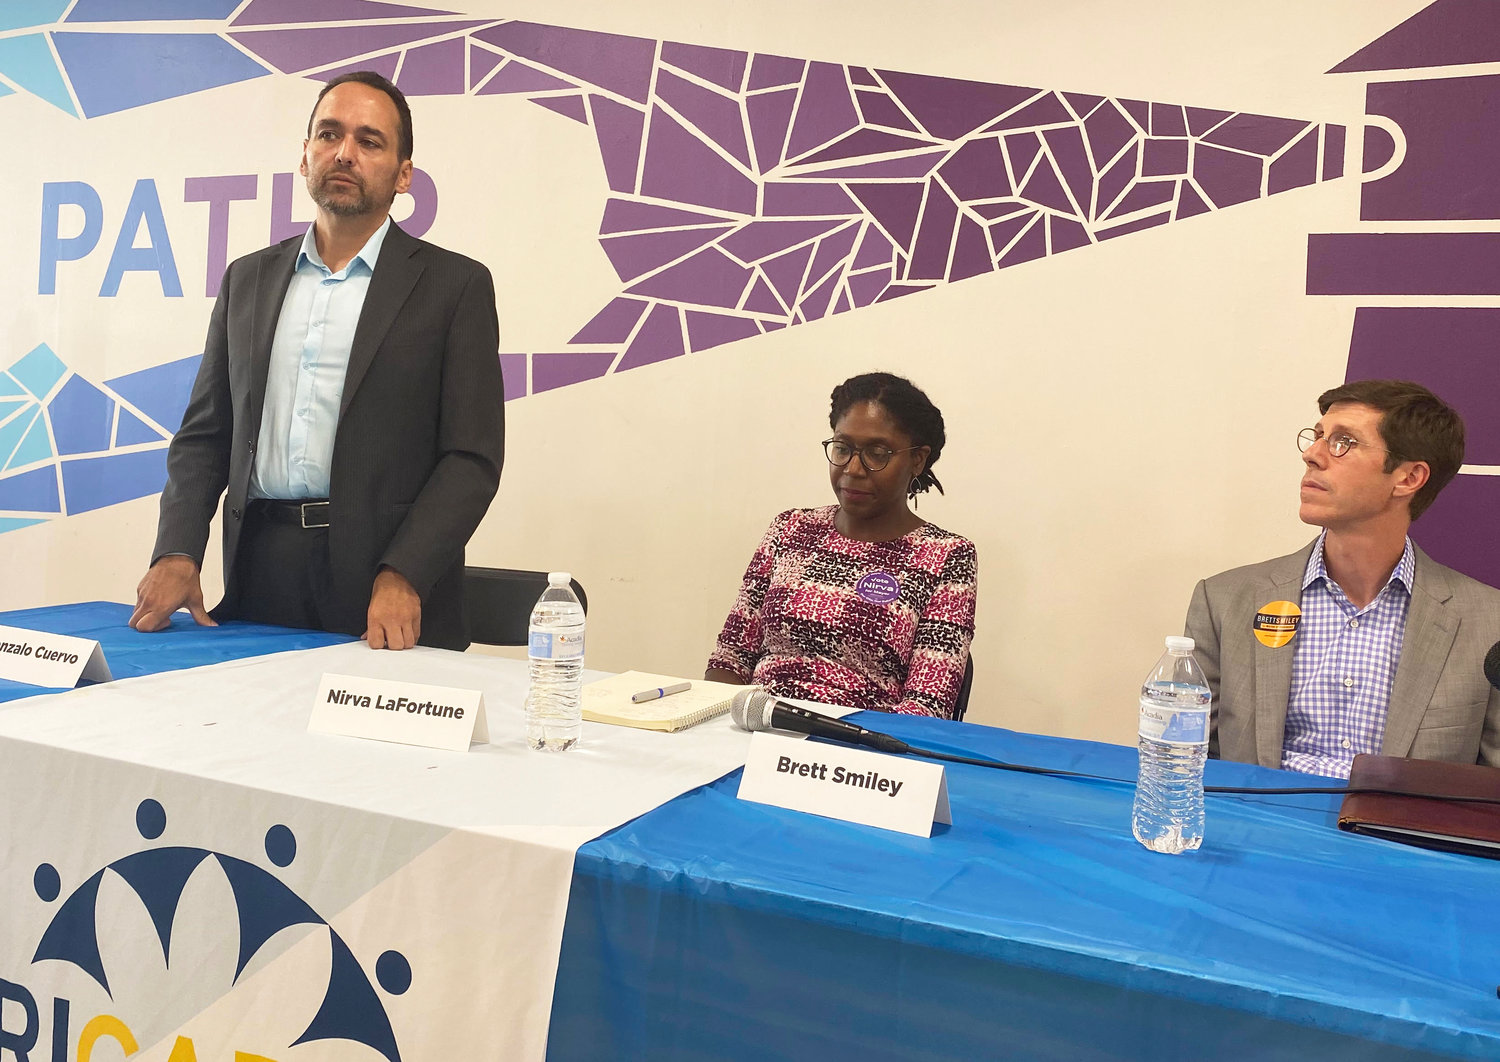 Gonzalo Cuervo, left, responds to questions at the Aug. 4 mayoral forum at the Jim Gillen Teen Center in Providence, as candidates Nirva LaFortune [center] and Brett Smiley [right] listen.